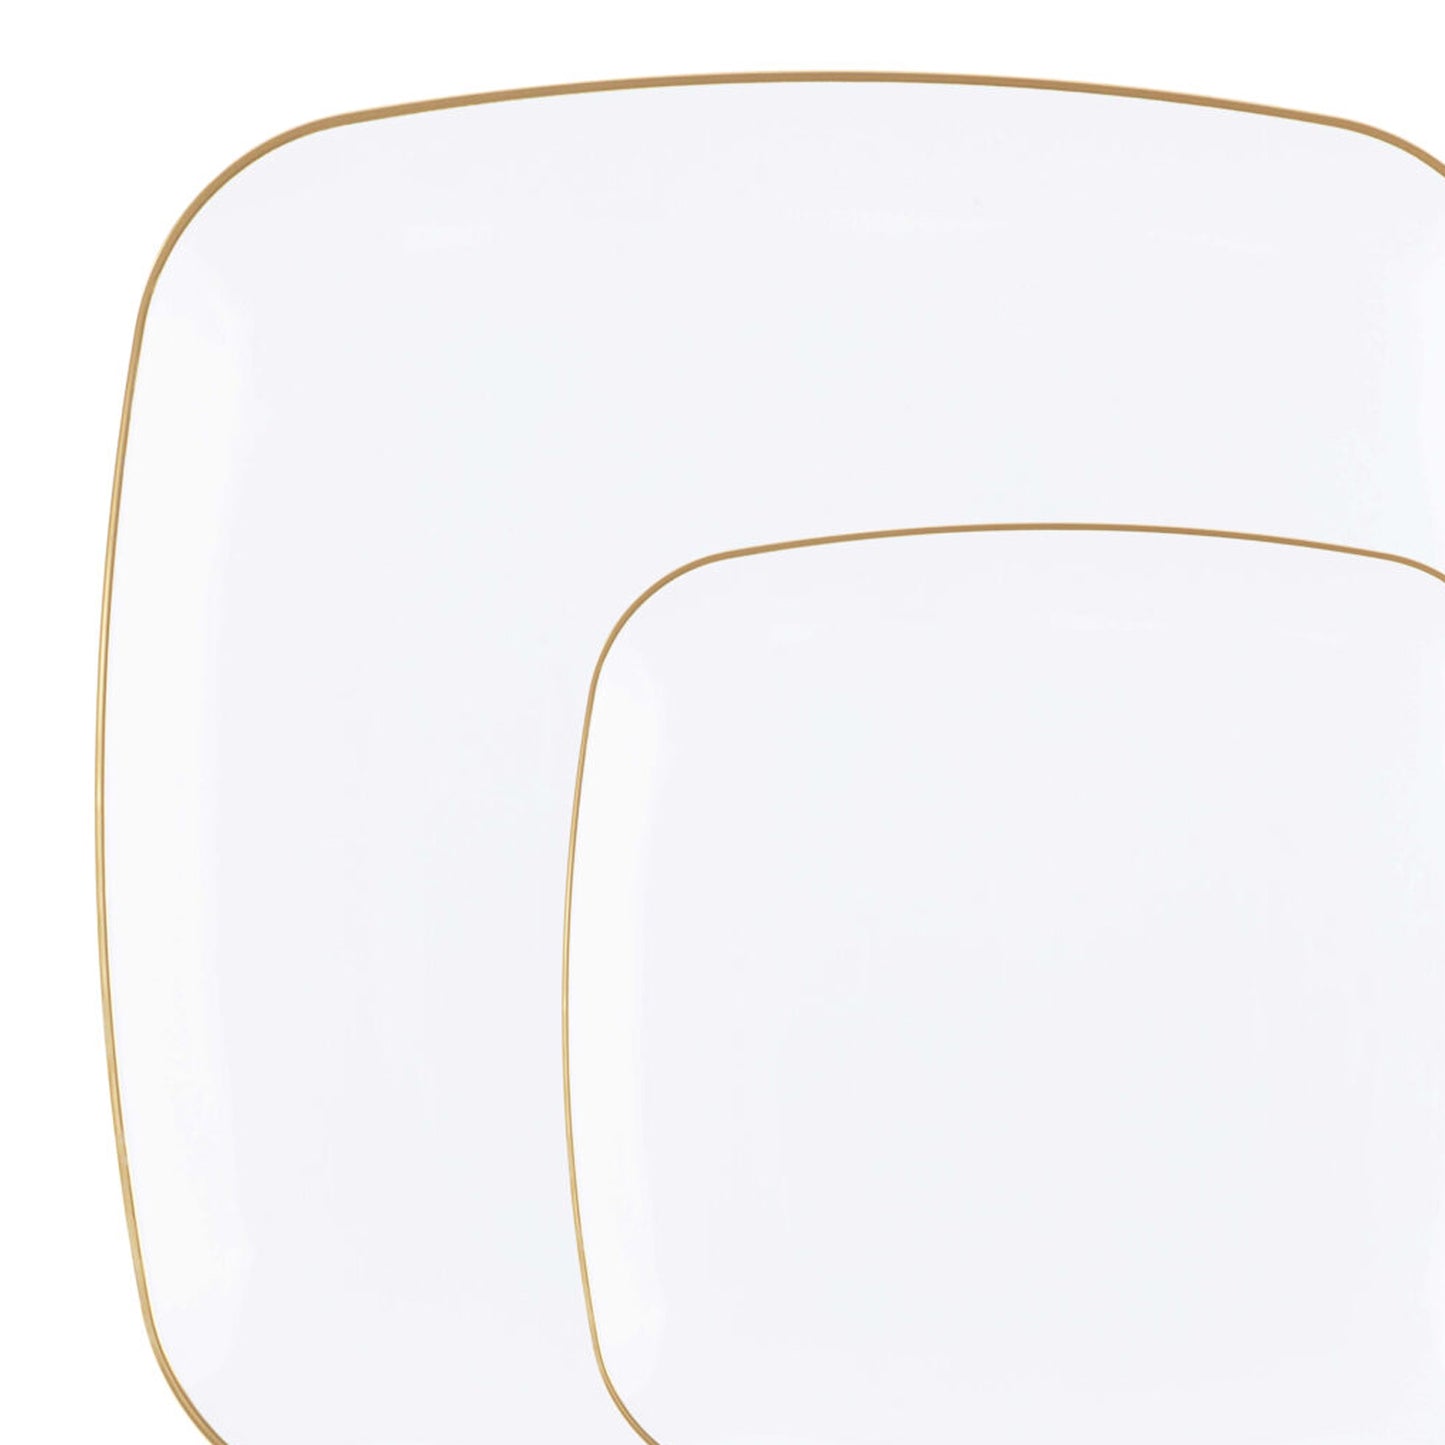 Orchid Collection White and Gold Rim Square Dinner Tableware Package Set Plates Blue Sky   